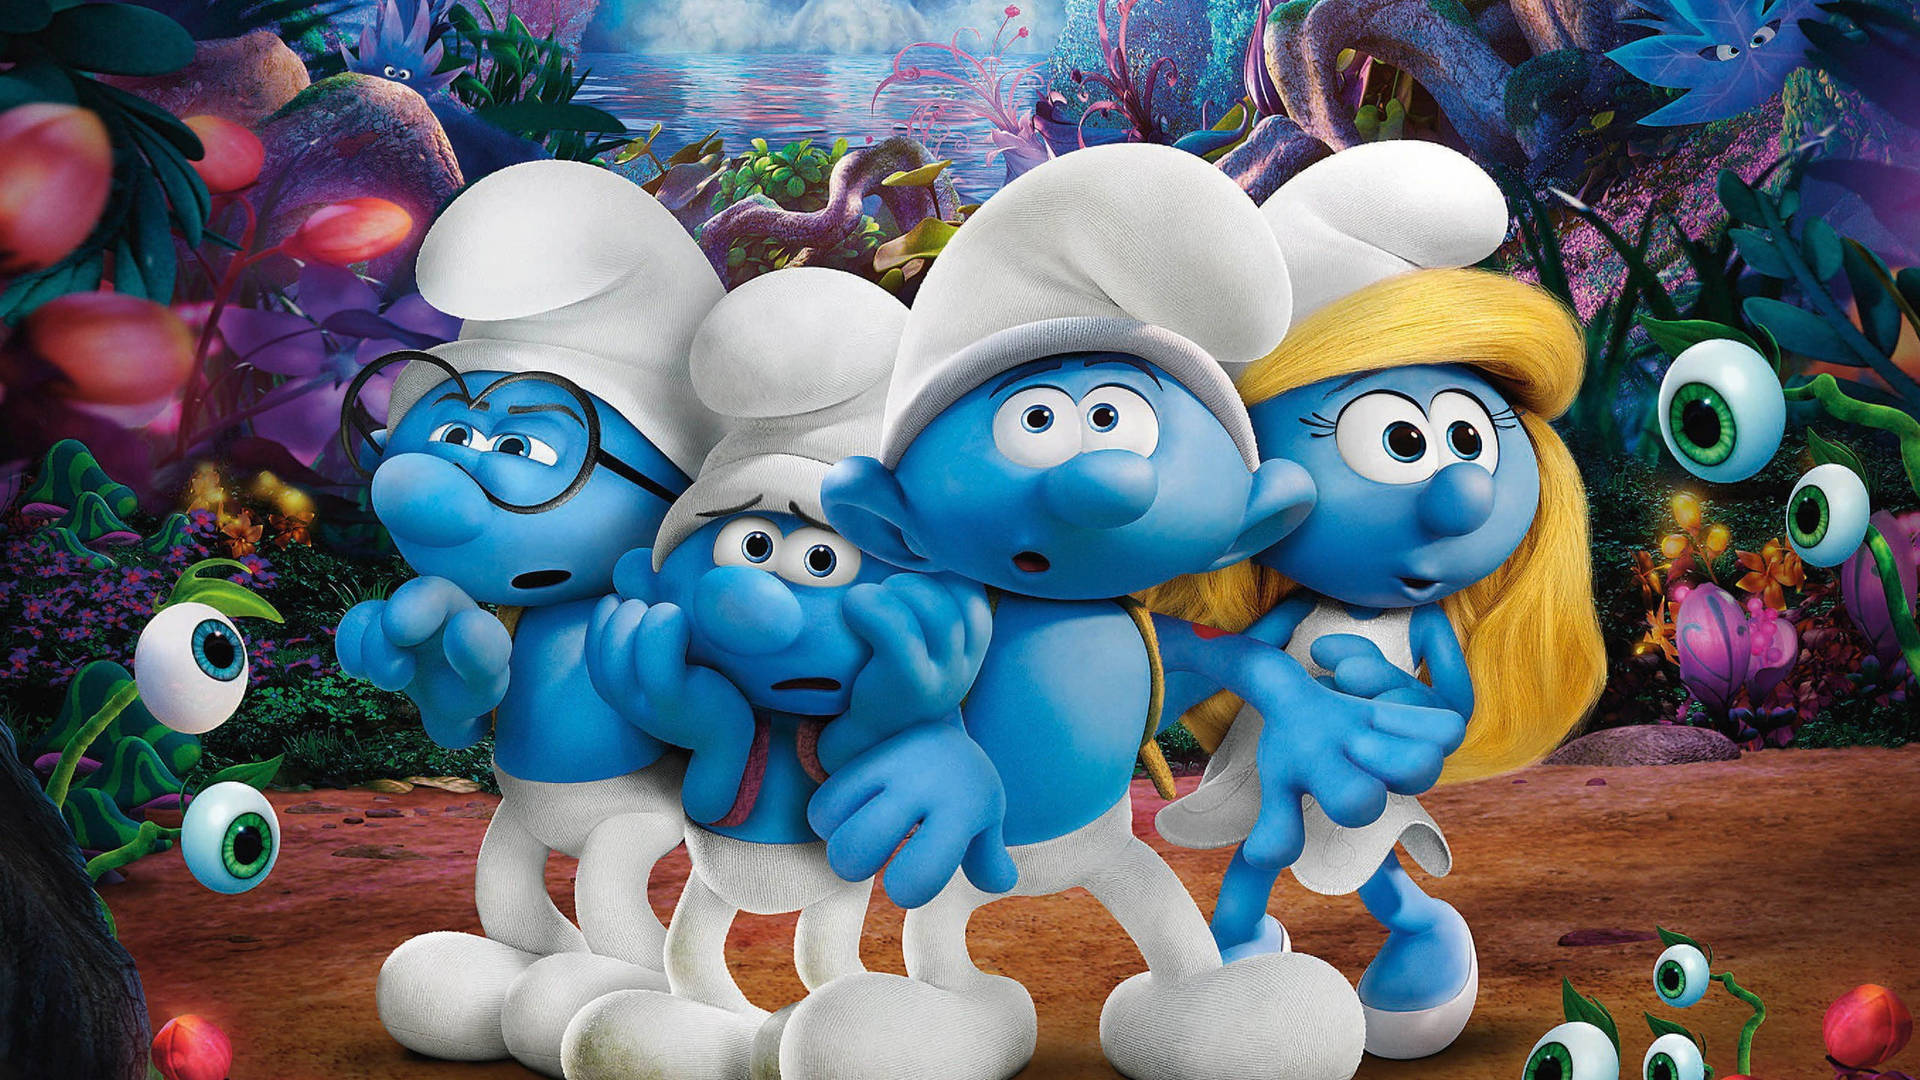 The Smurfs In The Lost Village Wallpaper